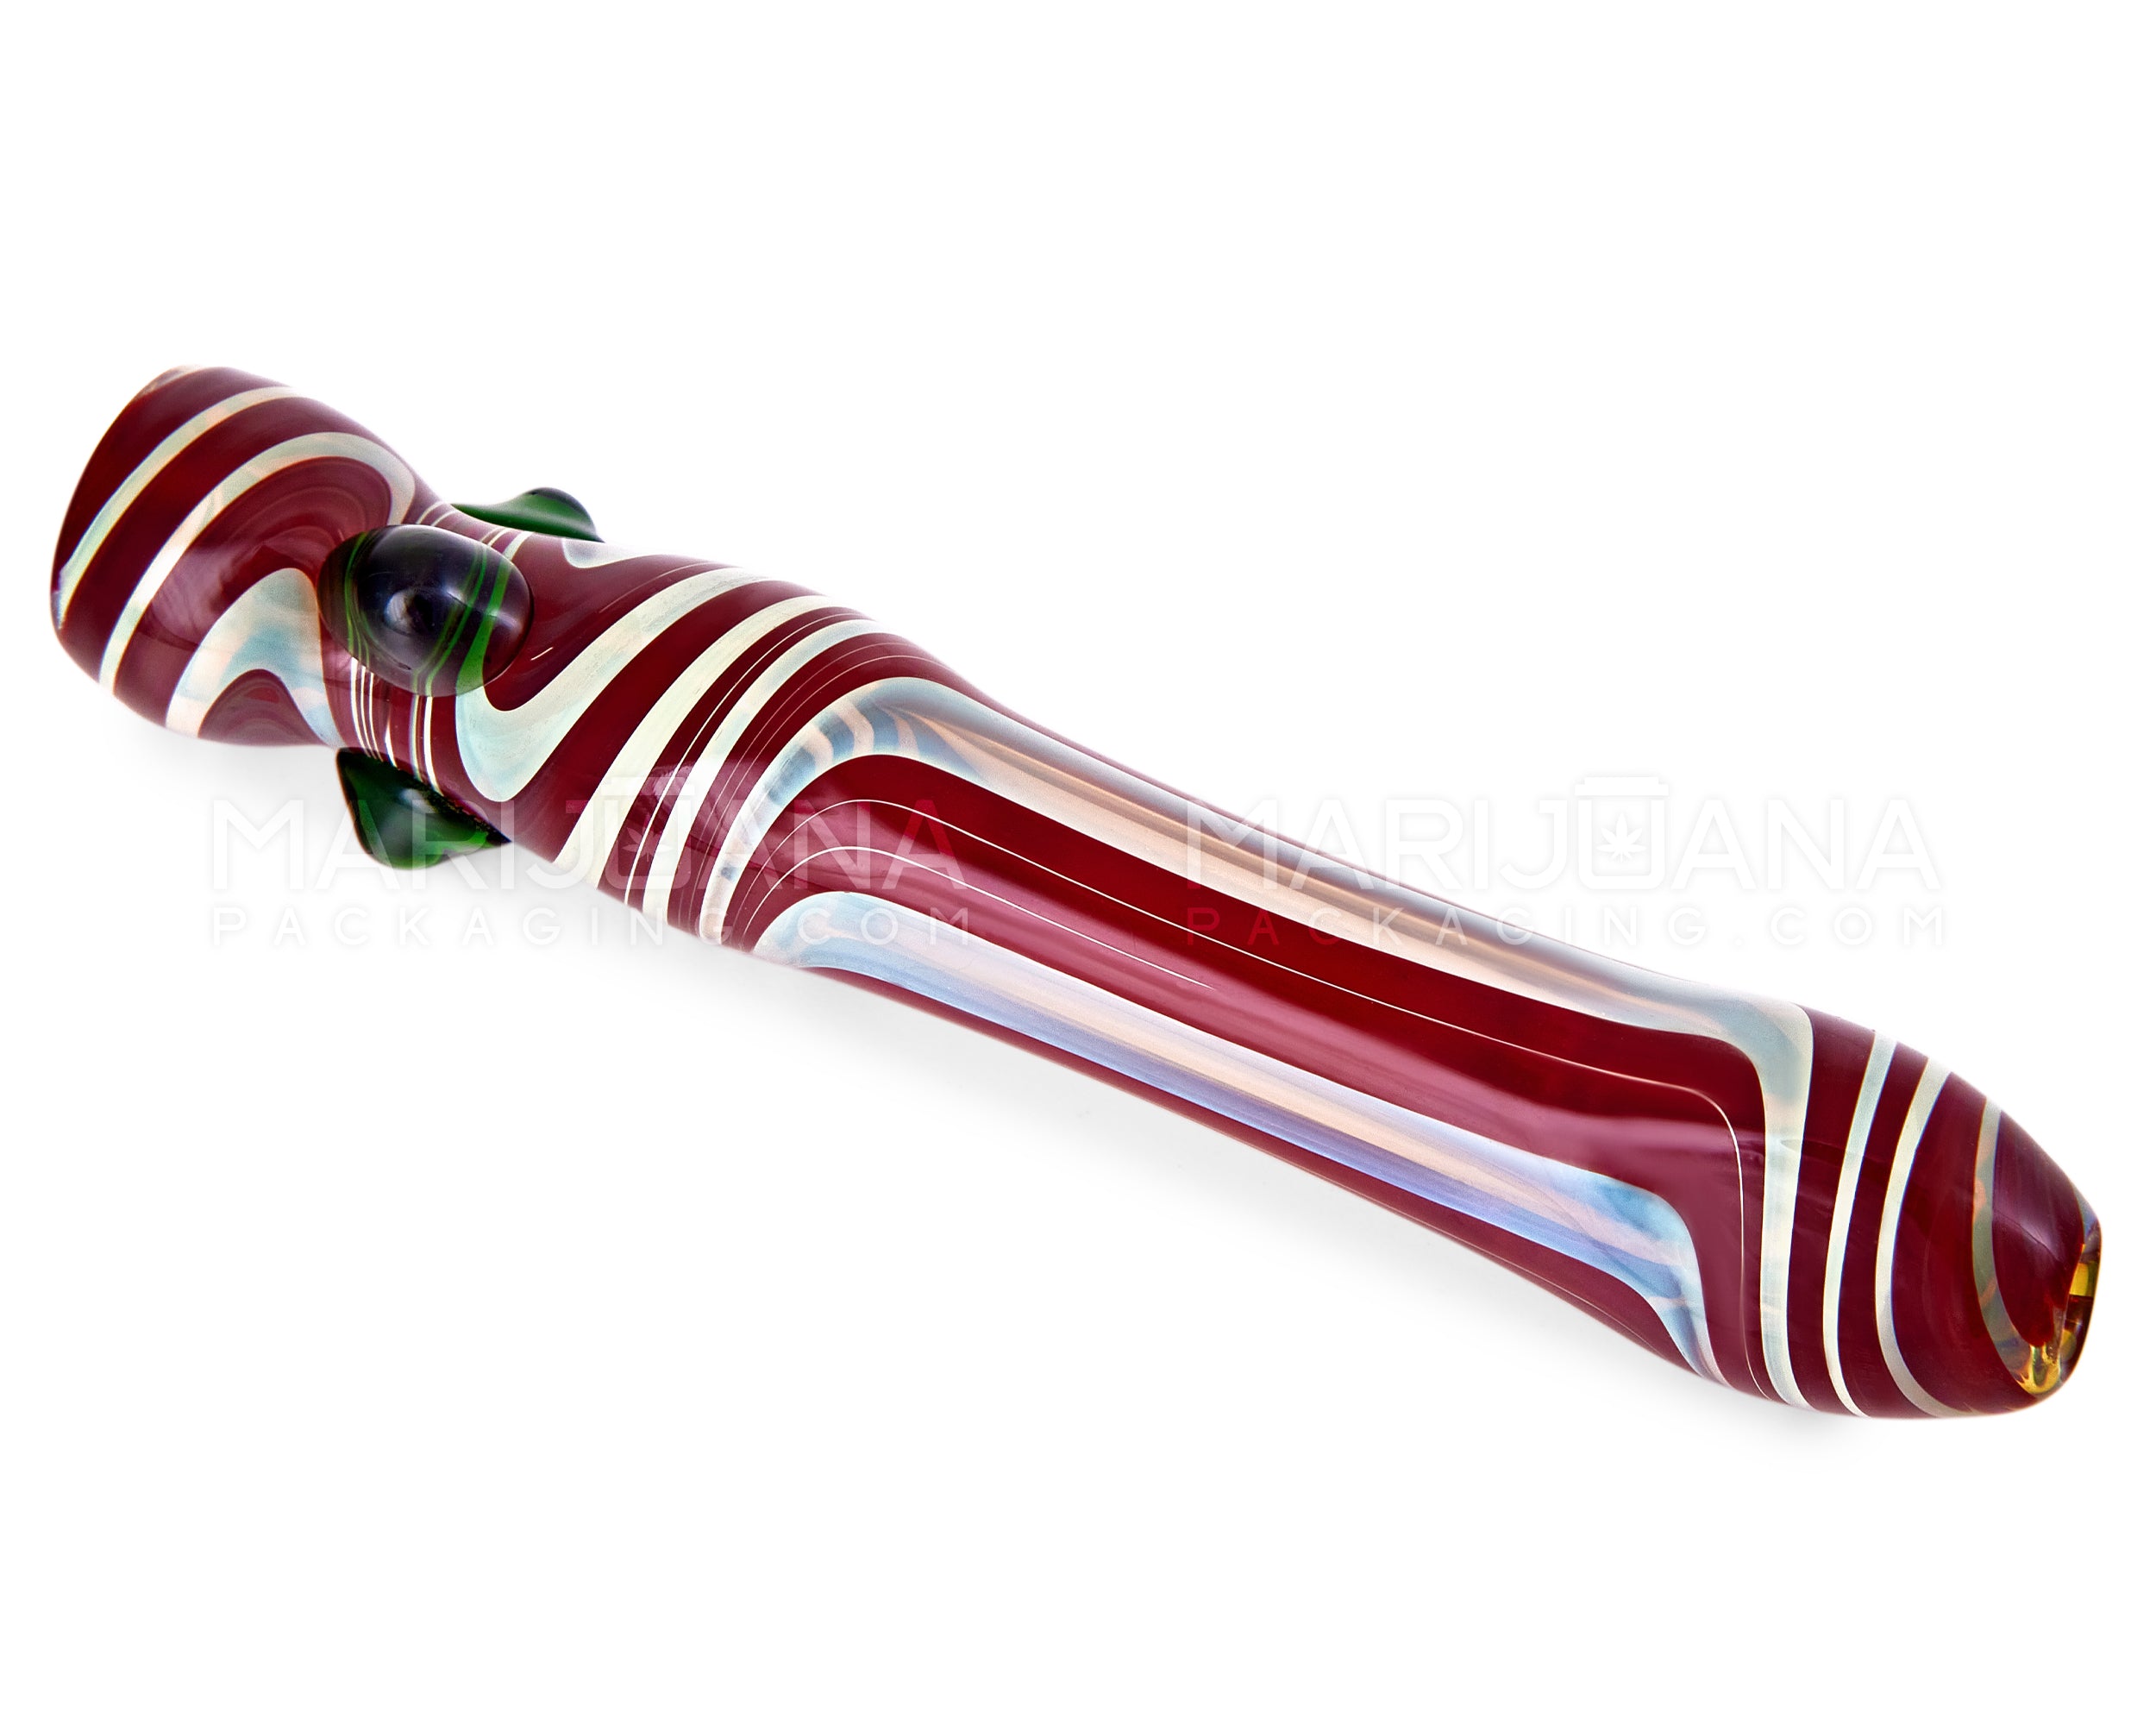 USA Glass | Swirl & Gold Fumed Chillum Hand Pipe w/ Triple Knockers | 3.5in Long - Glass - Assorted - 5